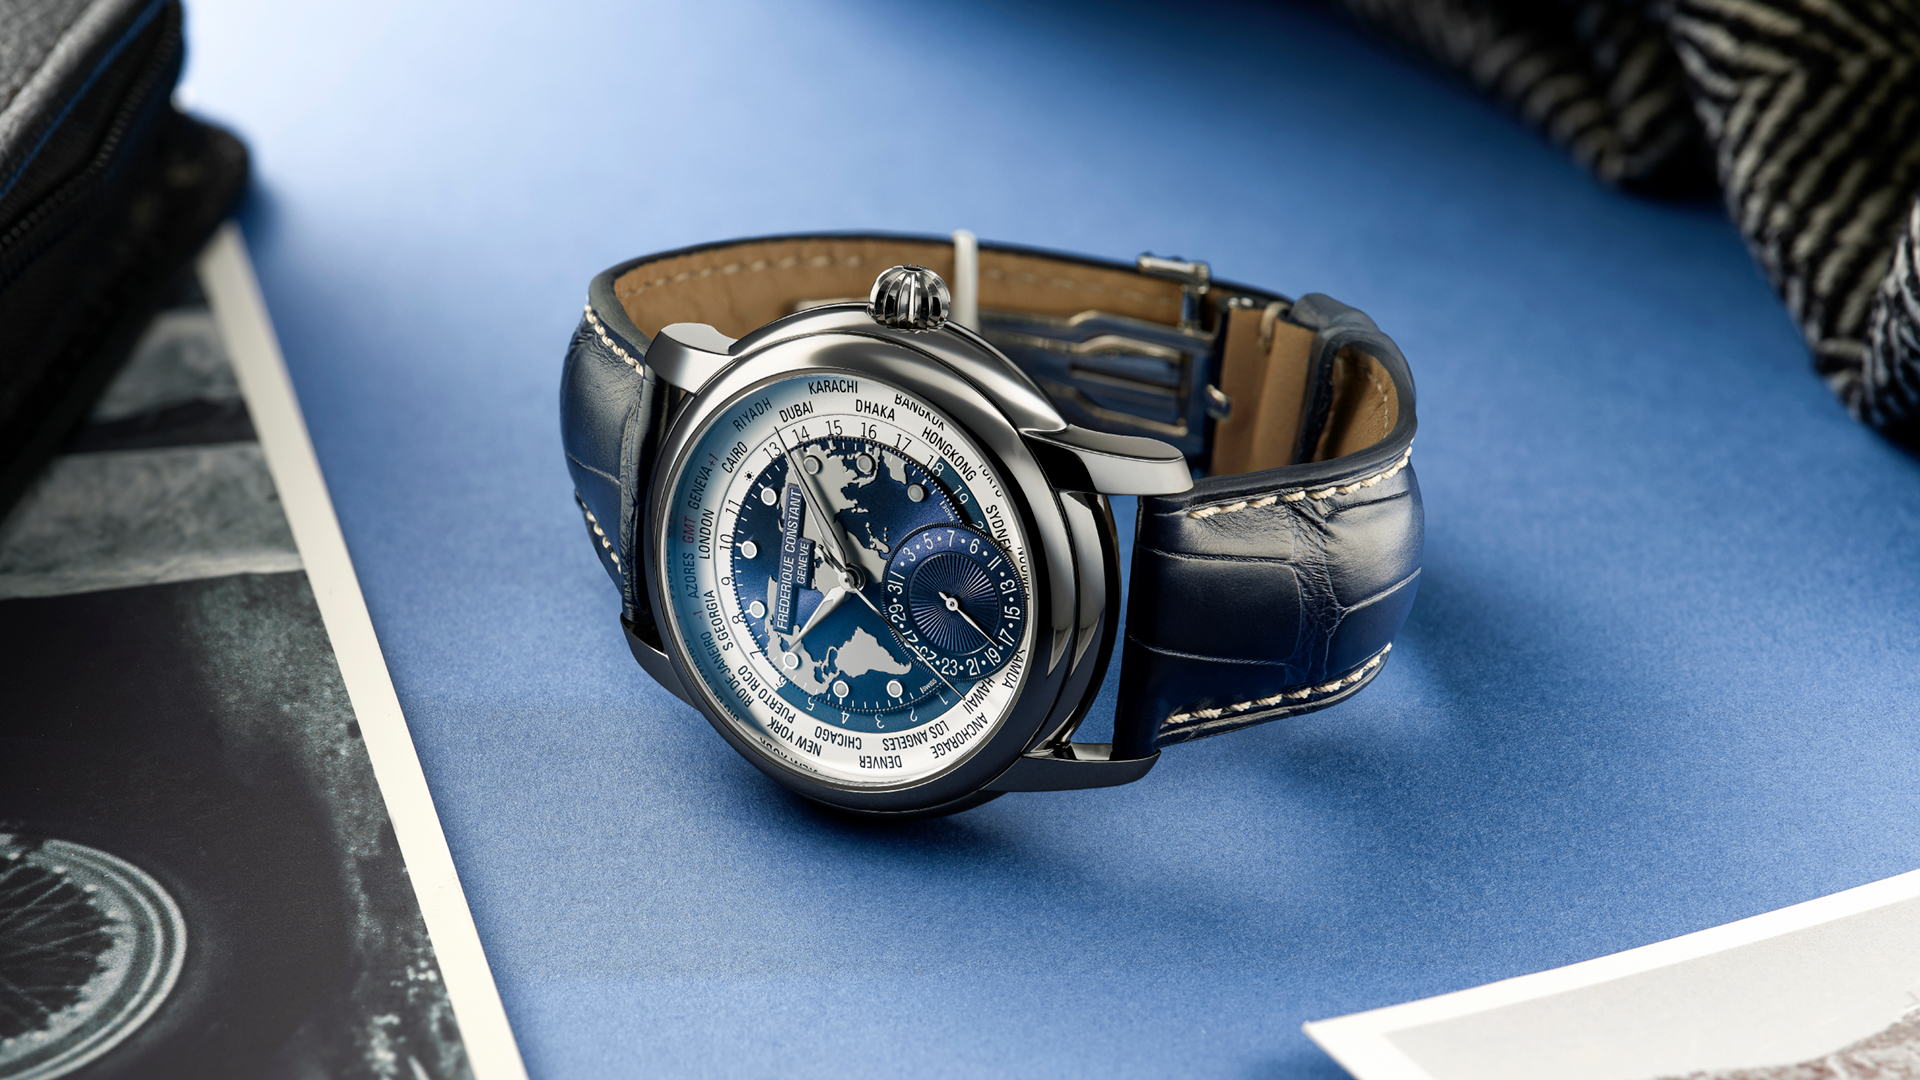 Worldtimer Manufacture watch for man. Automatic movement, grey and blue dial, stainless-steel case, date counter, worldtimer and blue leather strap